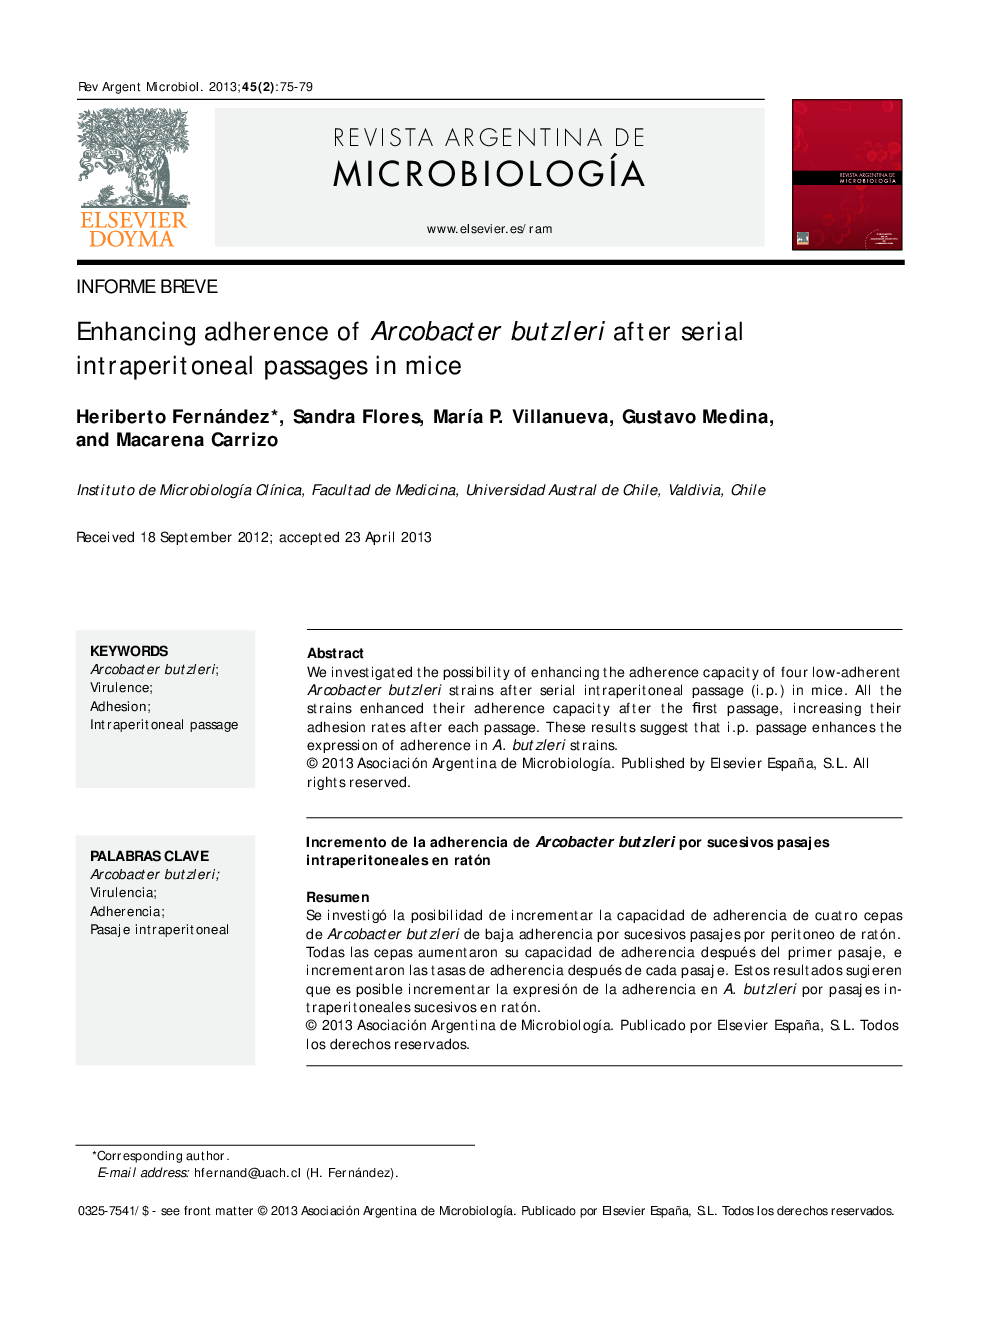 Enhancing adherence of Arcobacter butzleri after serial intraperitoneal passages in mice